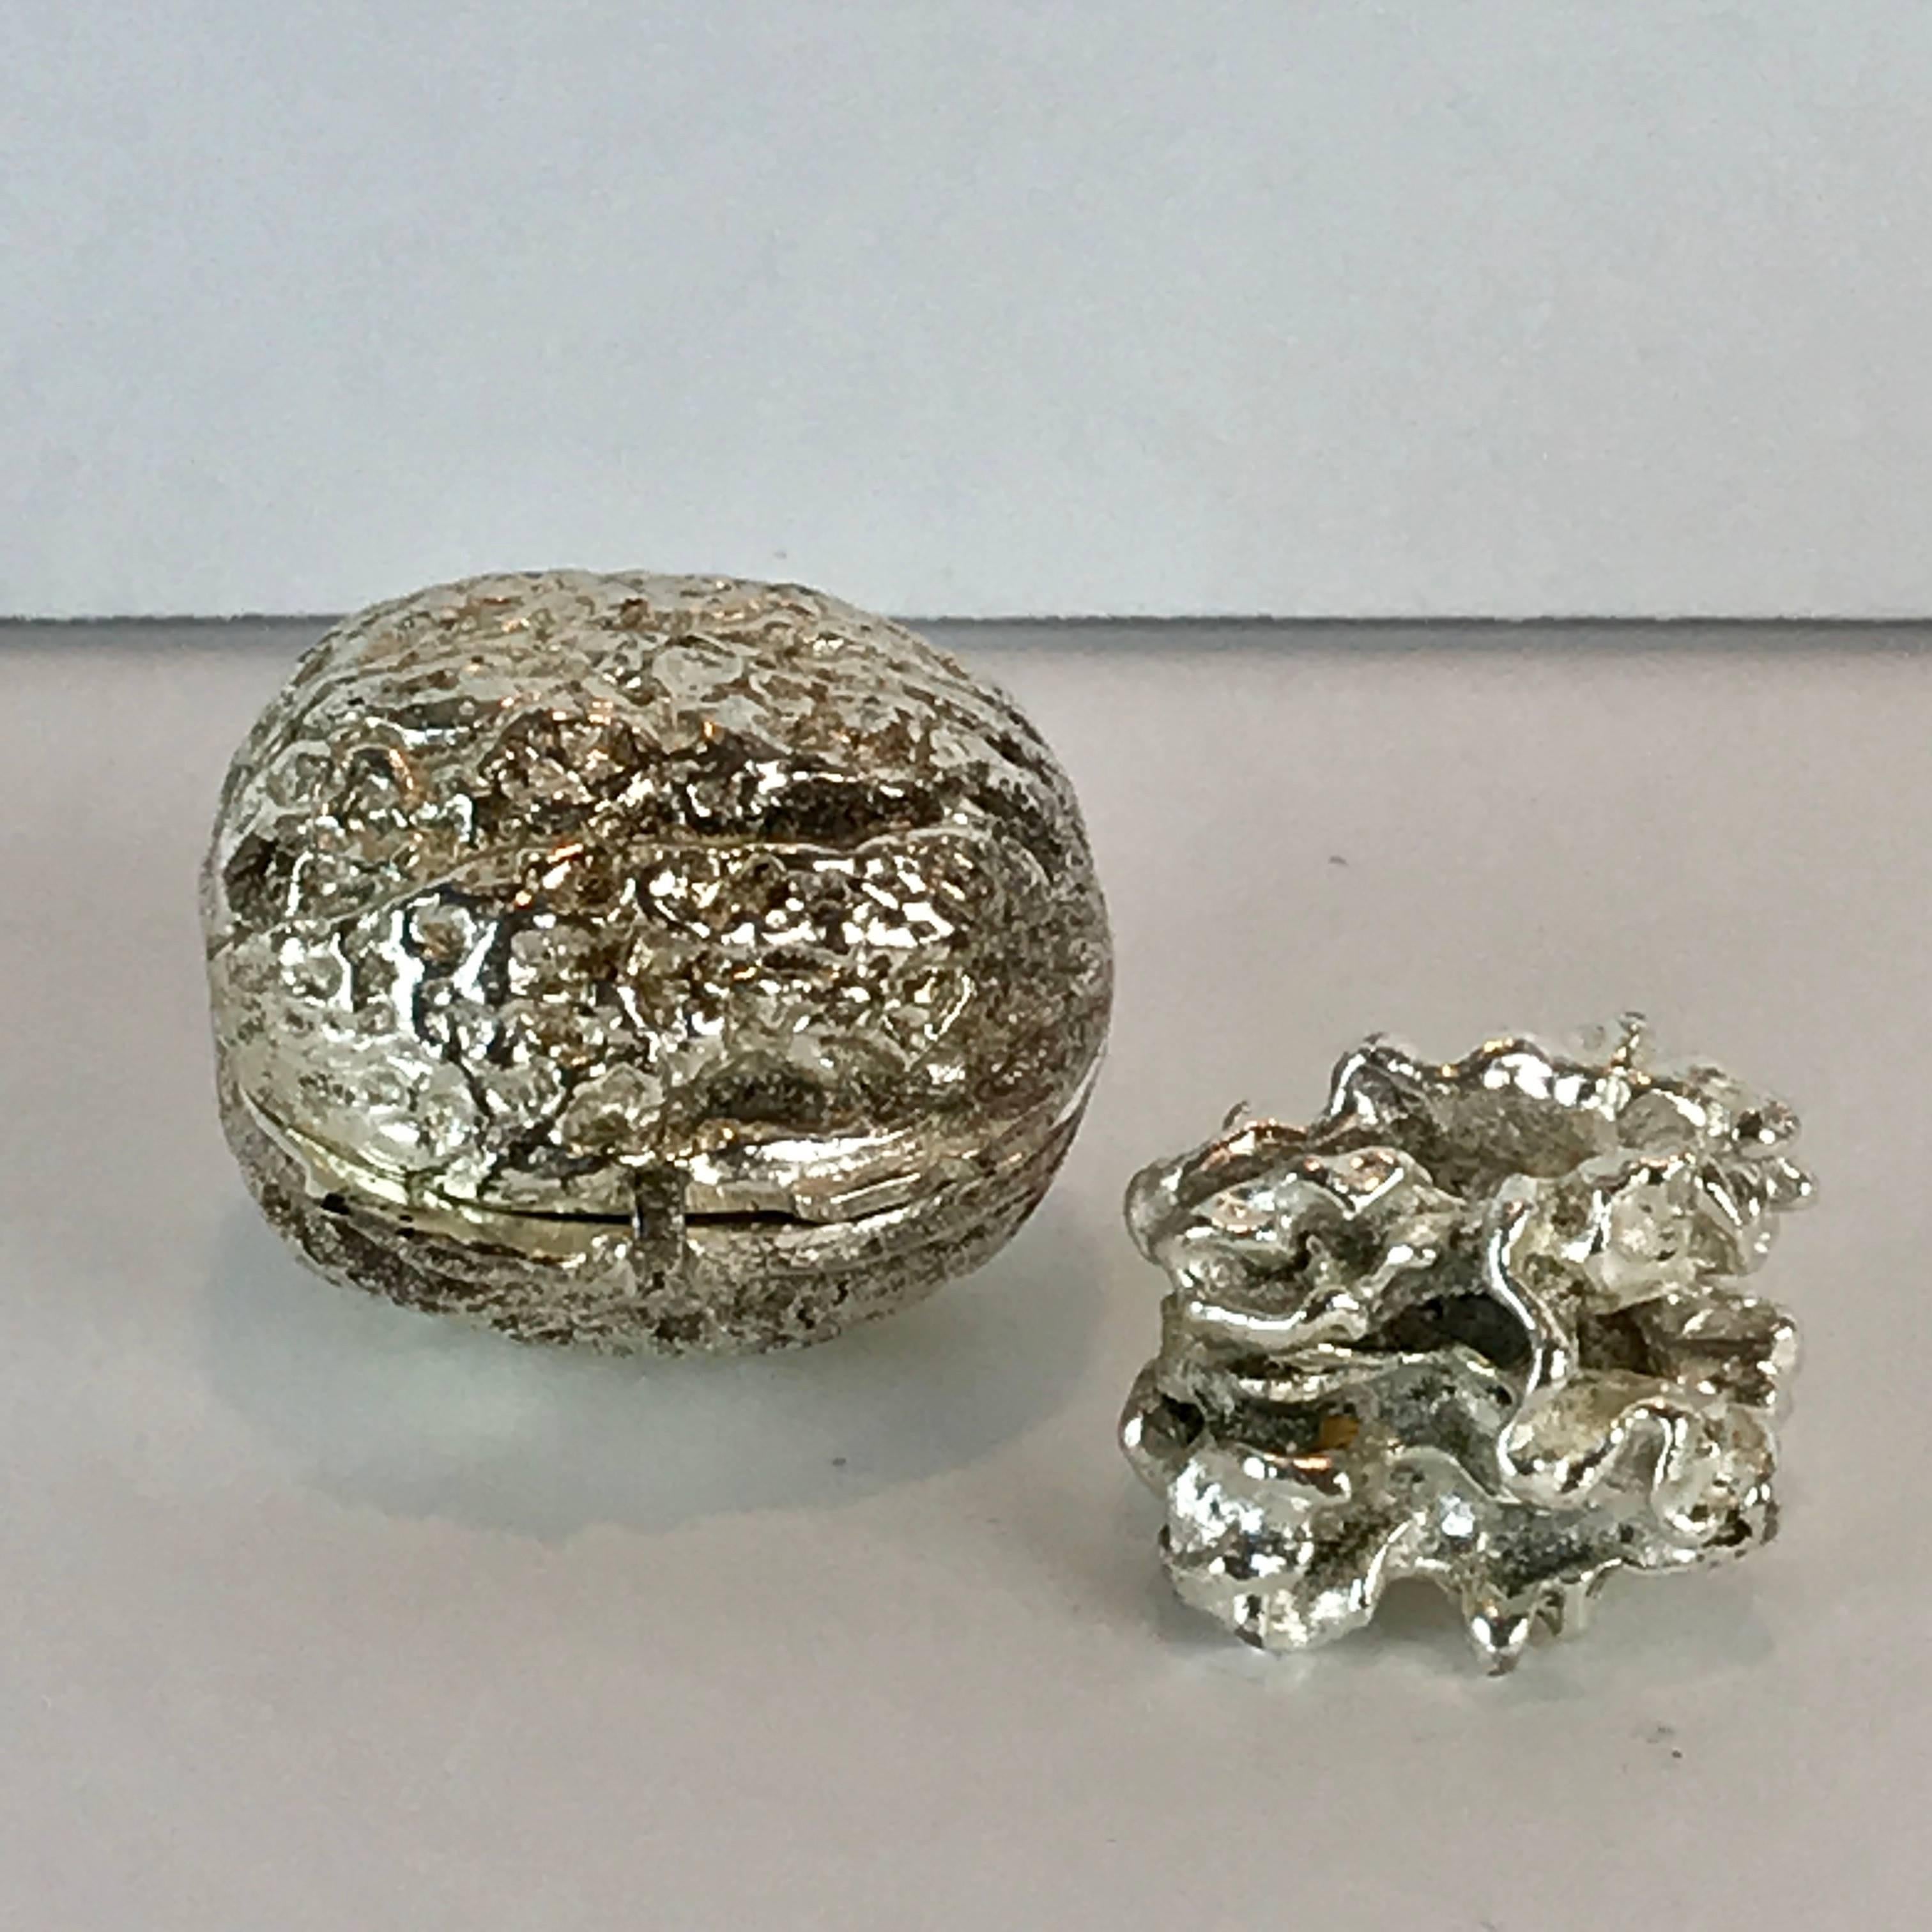 Silver plated bronze sculpture of a walnut. Lifesize, heavy, realistically cast in three pieces. Consisting of the hinged shell in two pieces and the kernel, unsigned
The shell measures 1.5